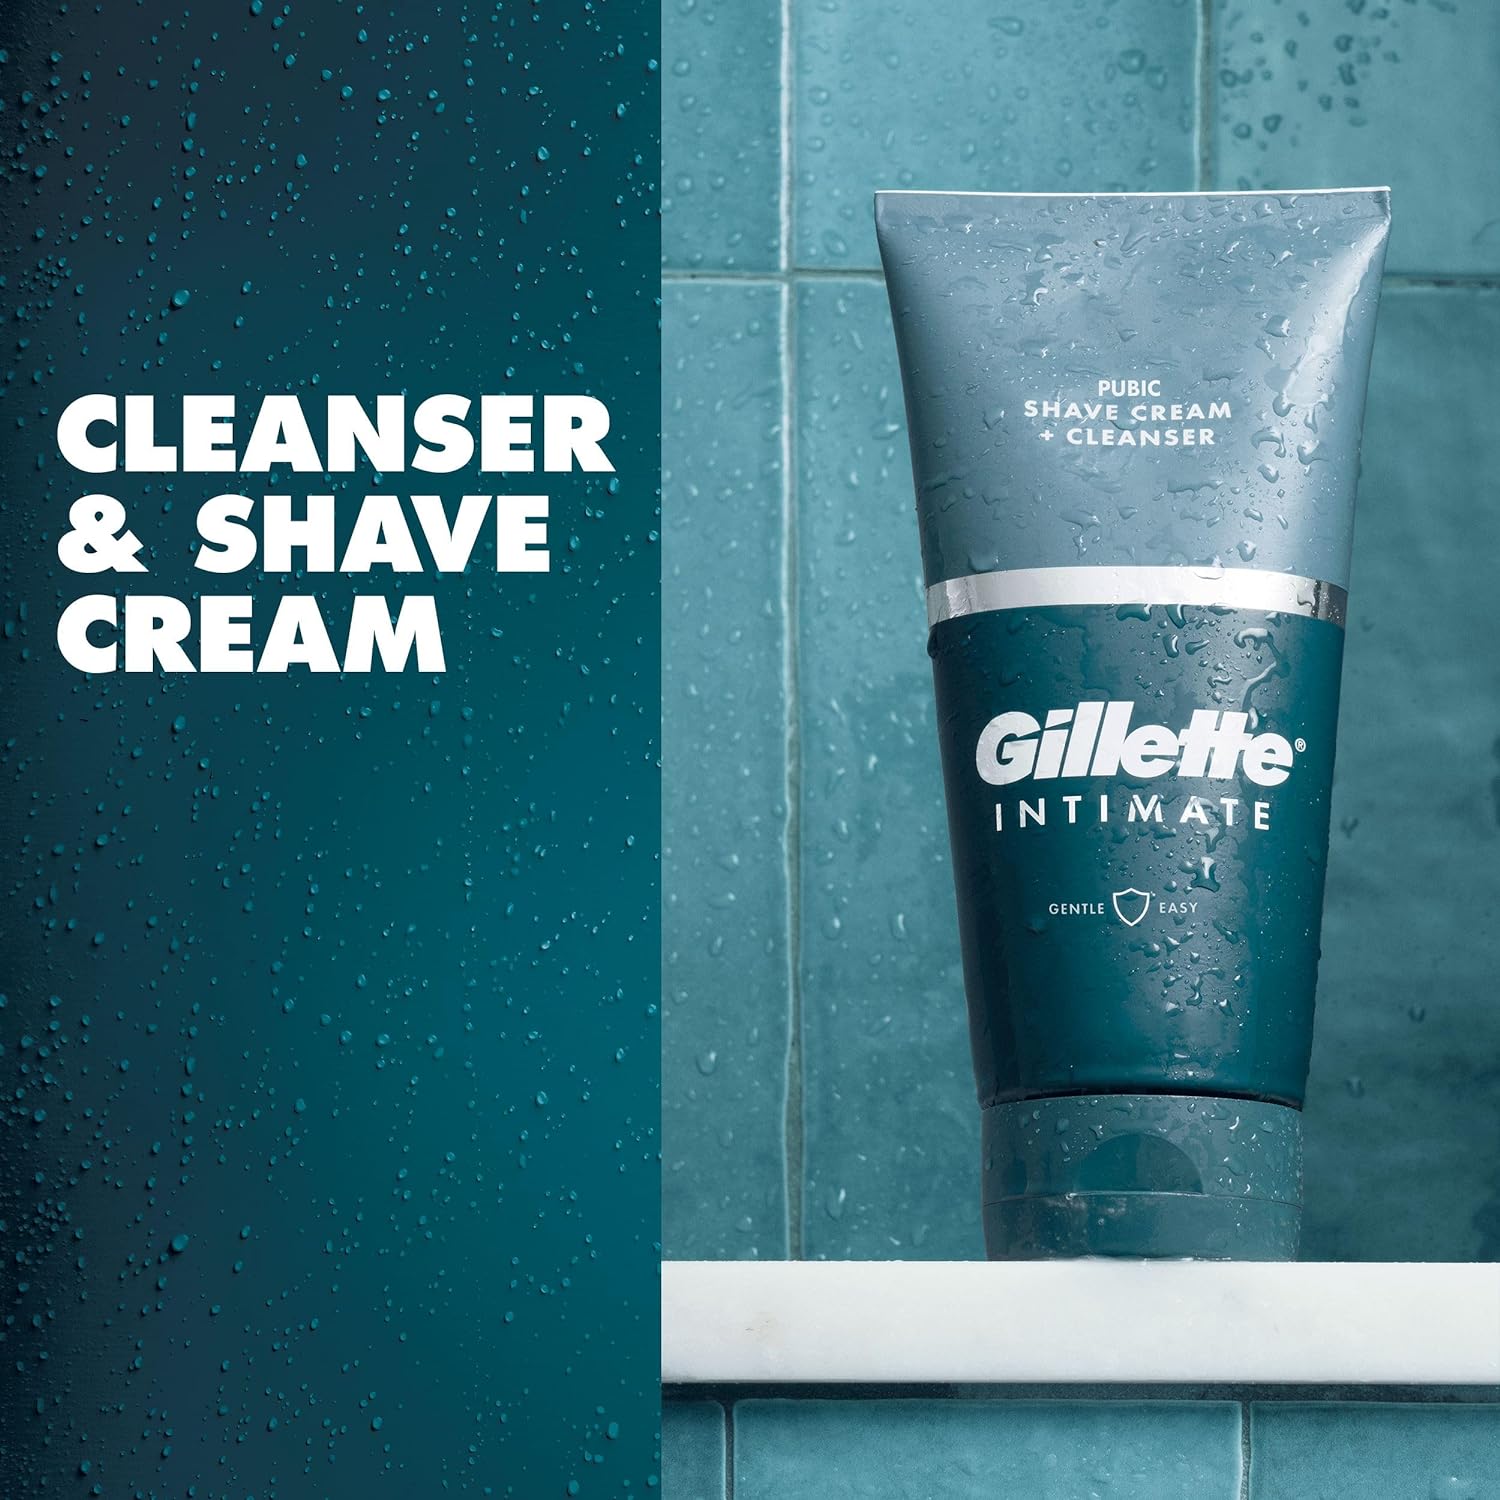 Gillette Intimate 2in1 Shave Cream & Cleanser, Gentle Formula with Aloe, Formulated for Pubic Hair, Paraben Free 150 ml